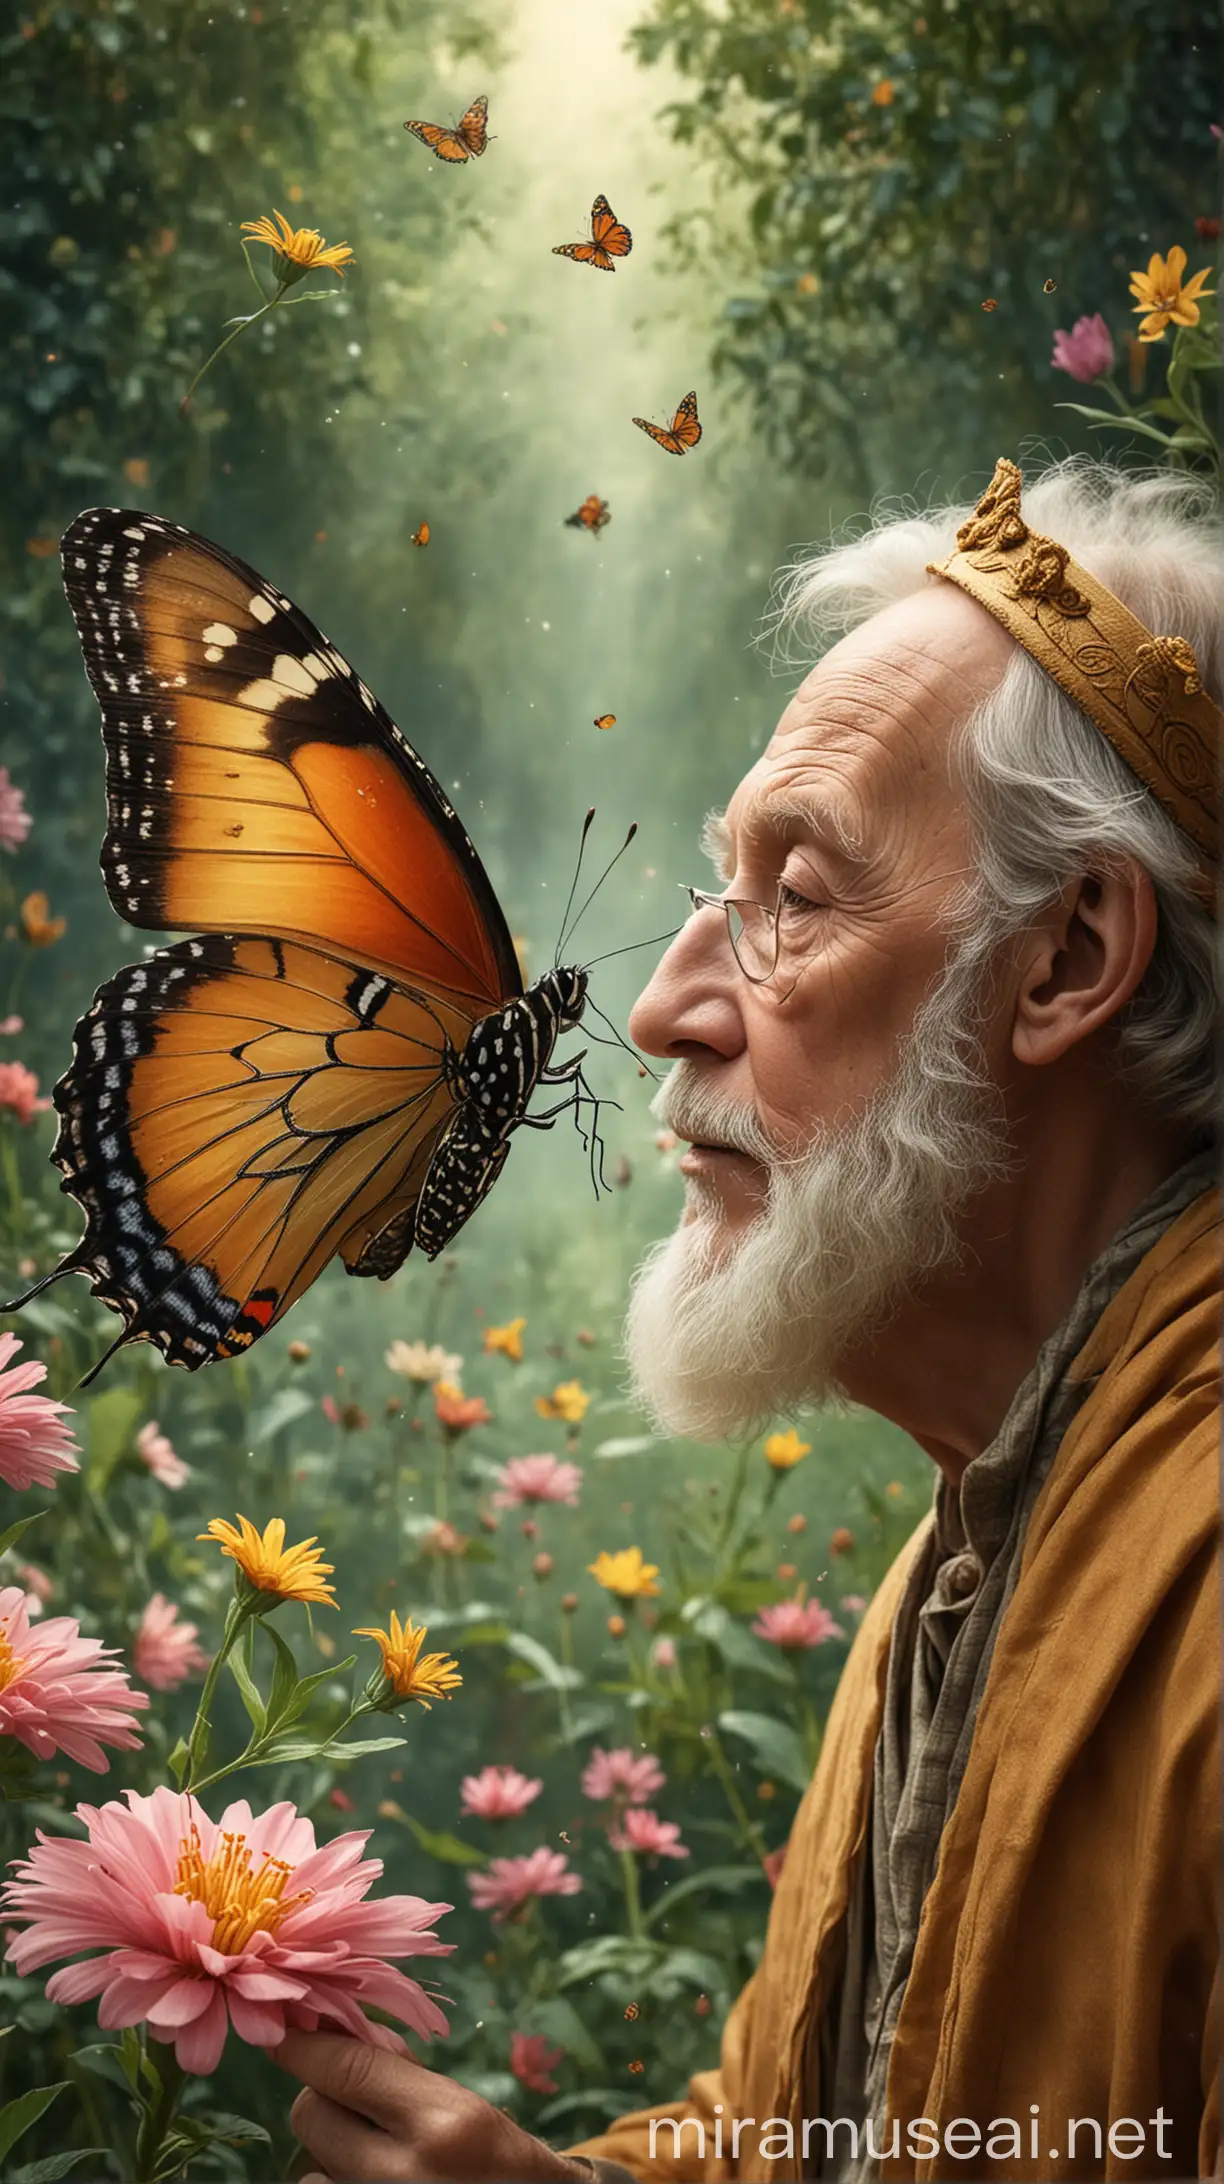 A wise man and a butterfly fluttering over a flower.